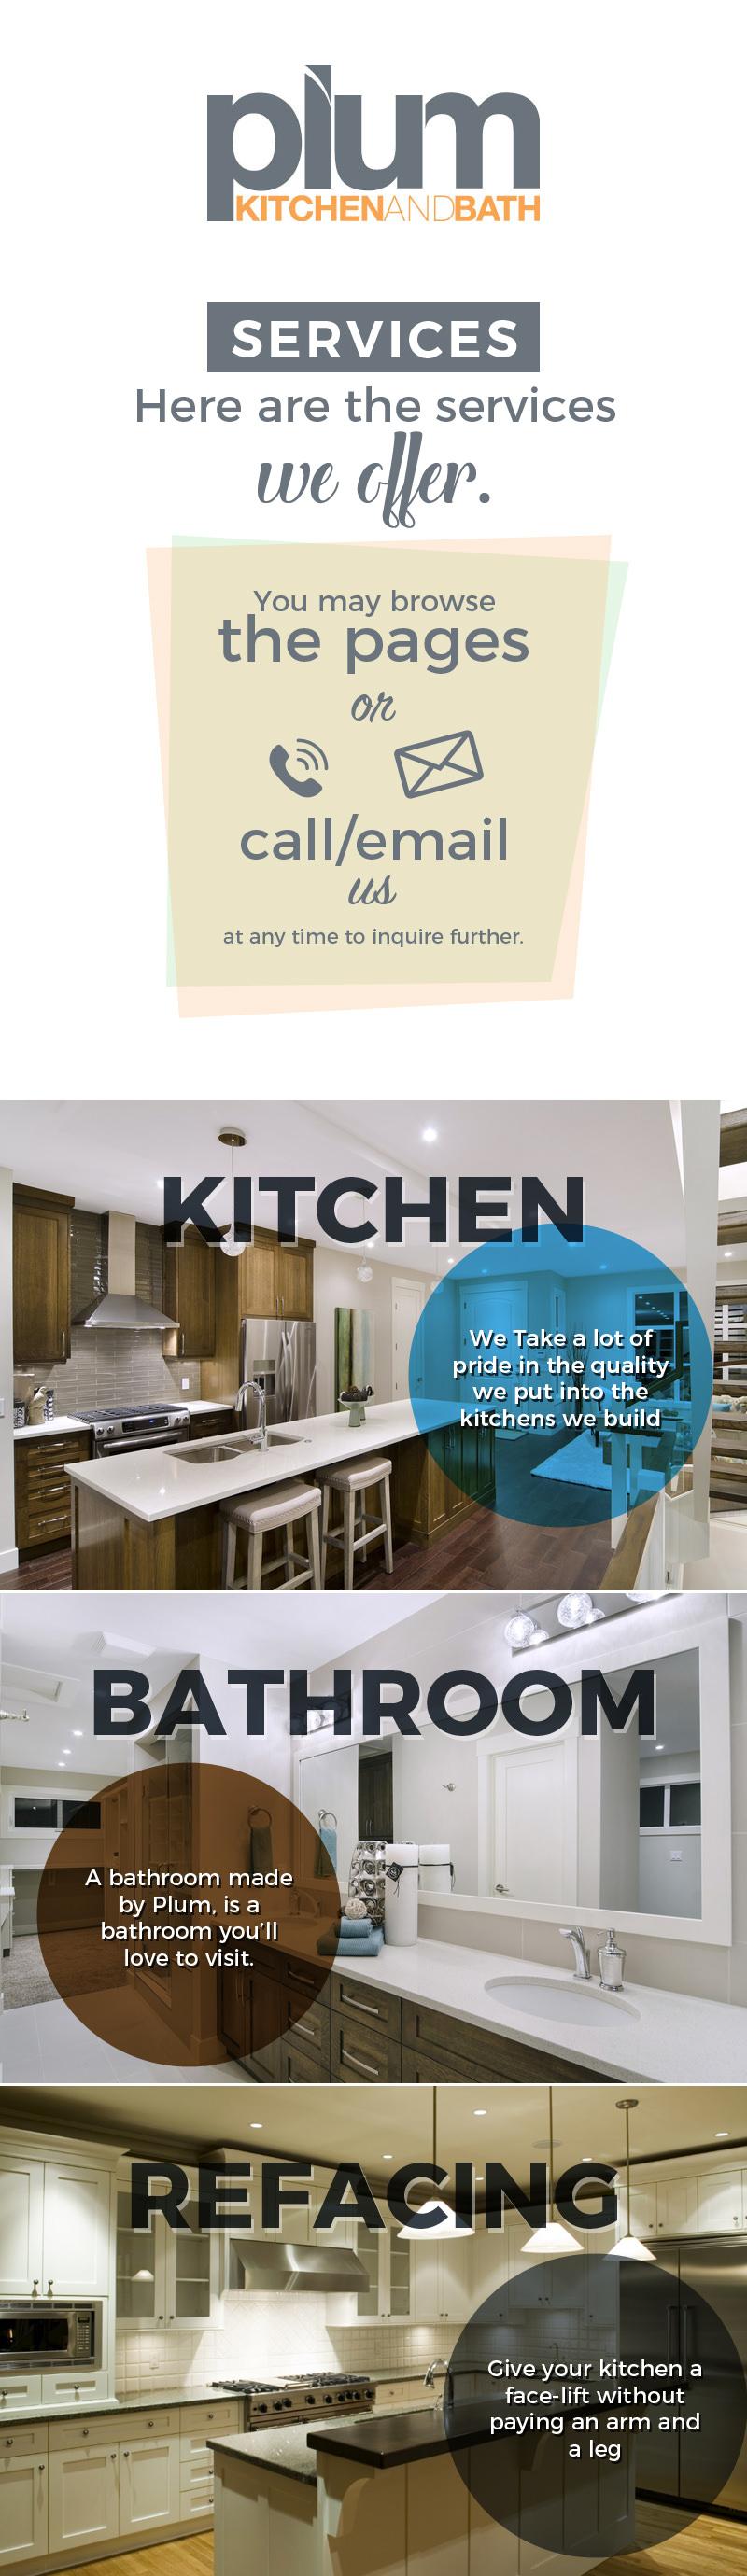 Plum Kitchen and Bath - Best Home Renovation Company in Canada